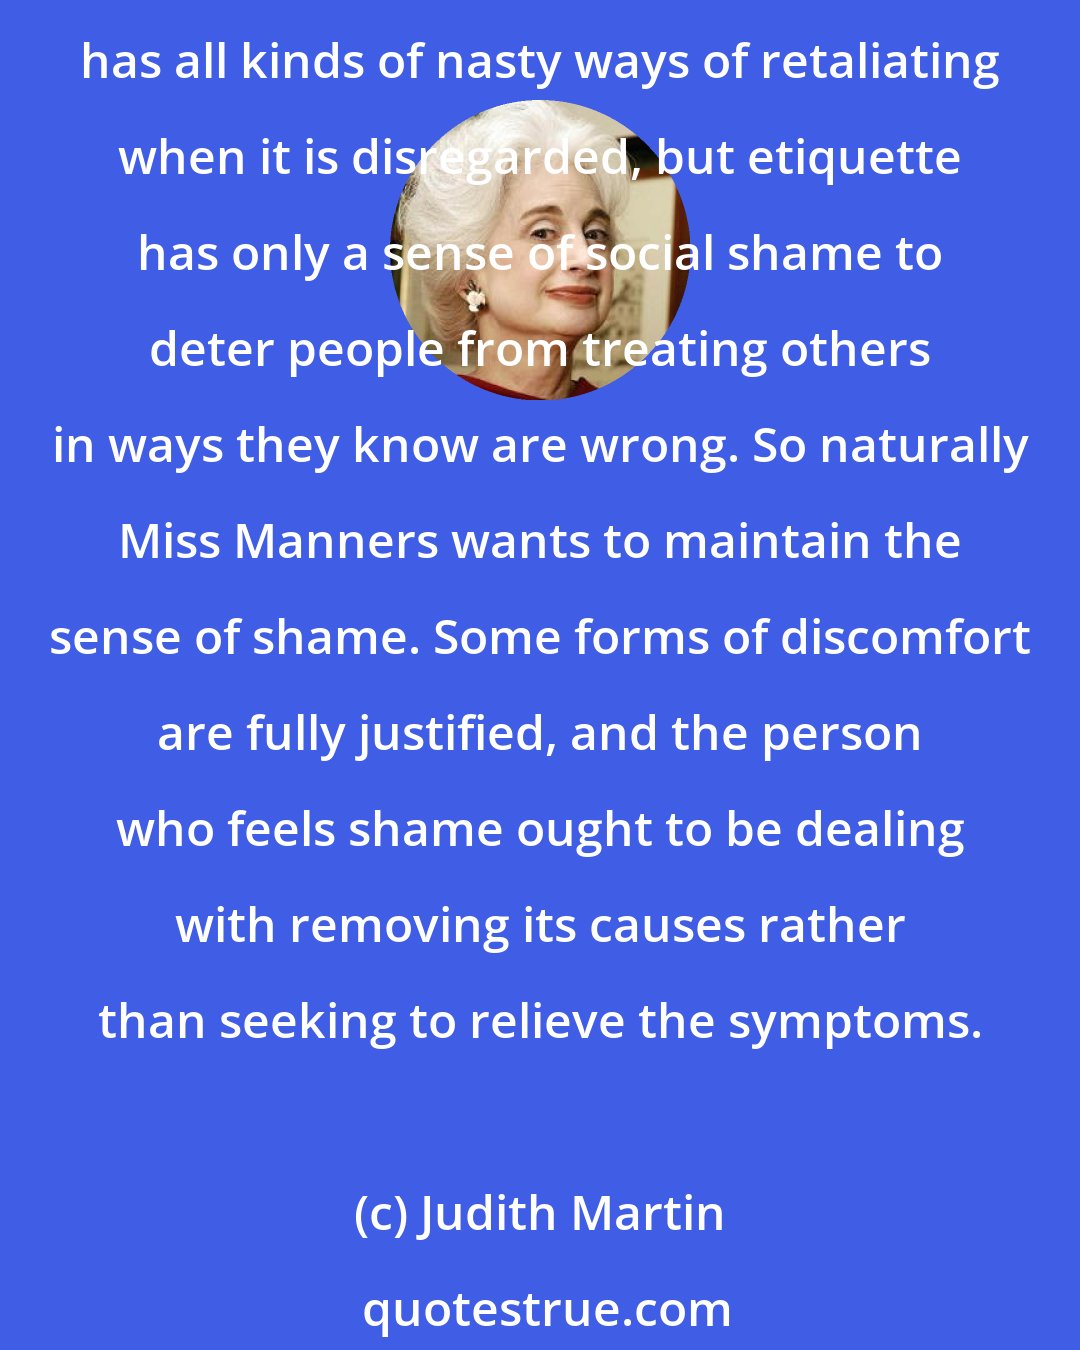 Judith Martin: Shame is the proper reaction when one has purposefully violated the accepted behavior of society. Inflicting it is etiquette's response when its rules are disobeyed. The law has all kinds of nasty ways of retaliating when it is disregarded, but etiquette has only a sense of social shame to deter people from treating others in ways they know are wrong. So naturally Miss Manners wants to maintain the sense of shame. Some forms of discomfort are fully justified, and the person who feels shame ought to be dealing with removing its causes rather than seeking to relieve the symptoms.